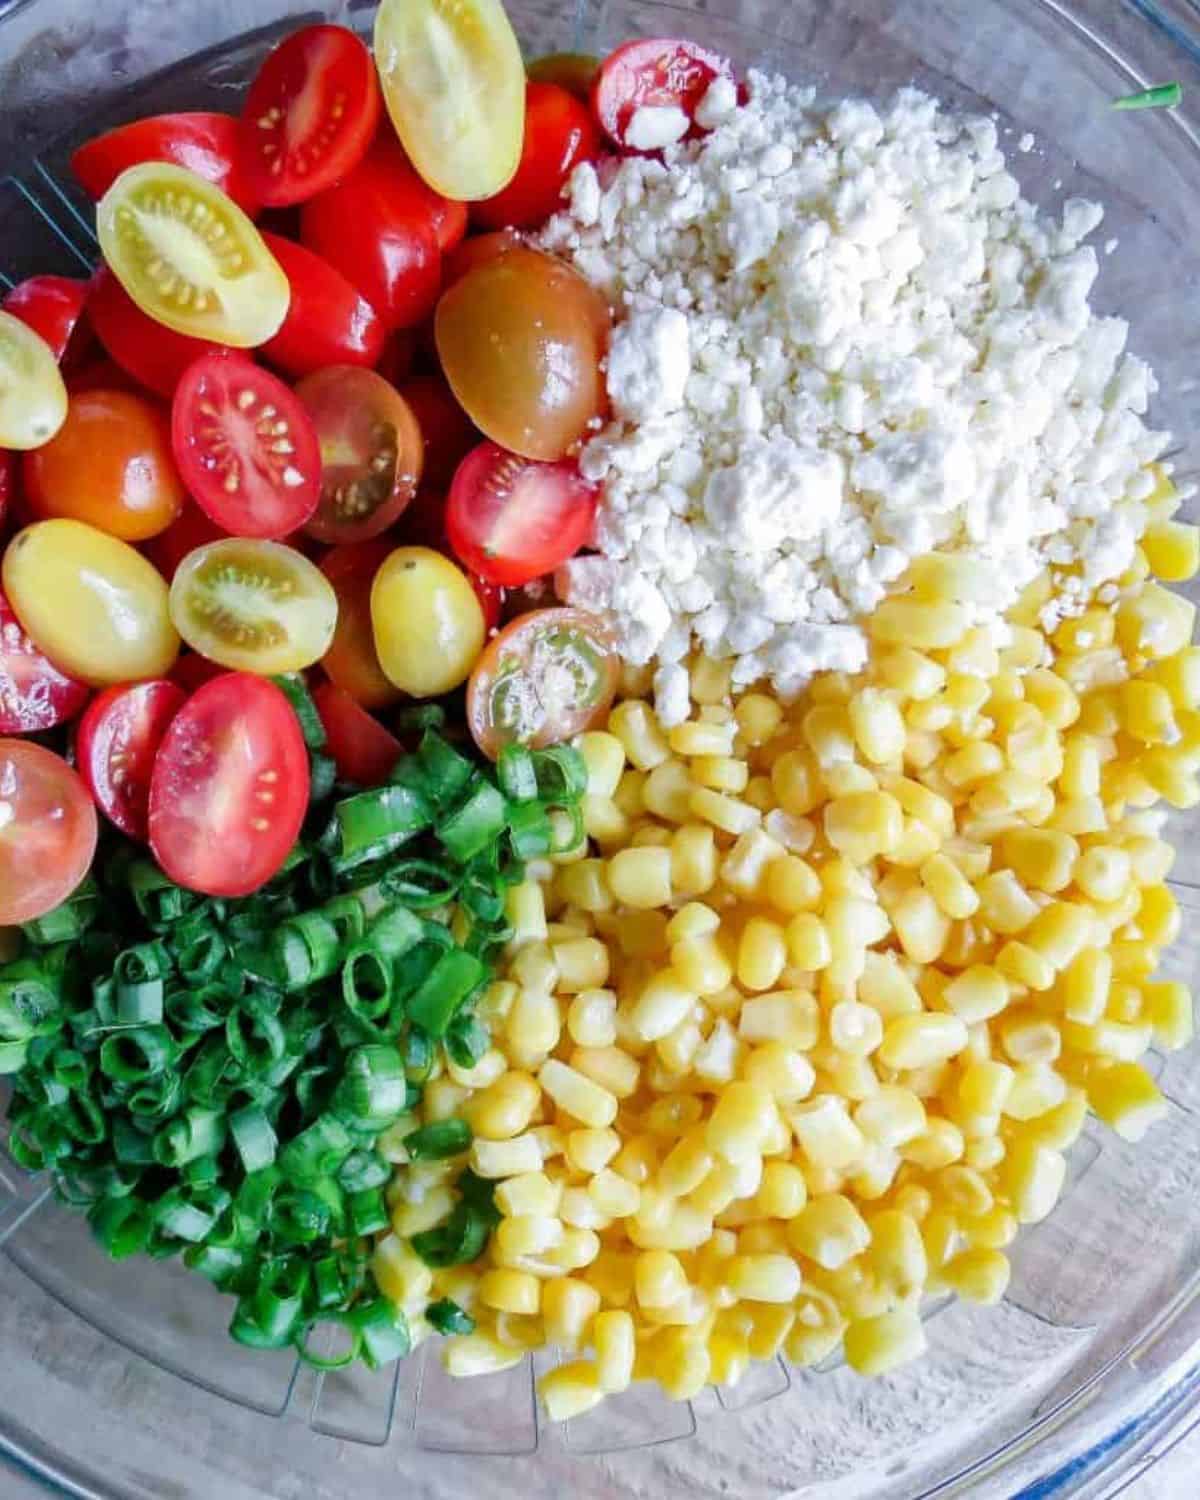 A glass bowl full of ingredients for Corn Salad With Tomatoes.